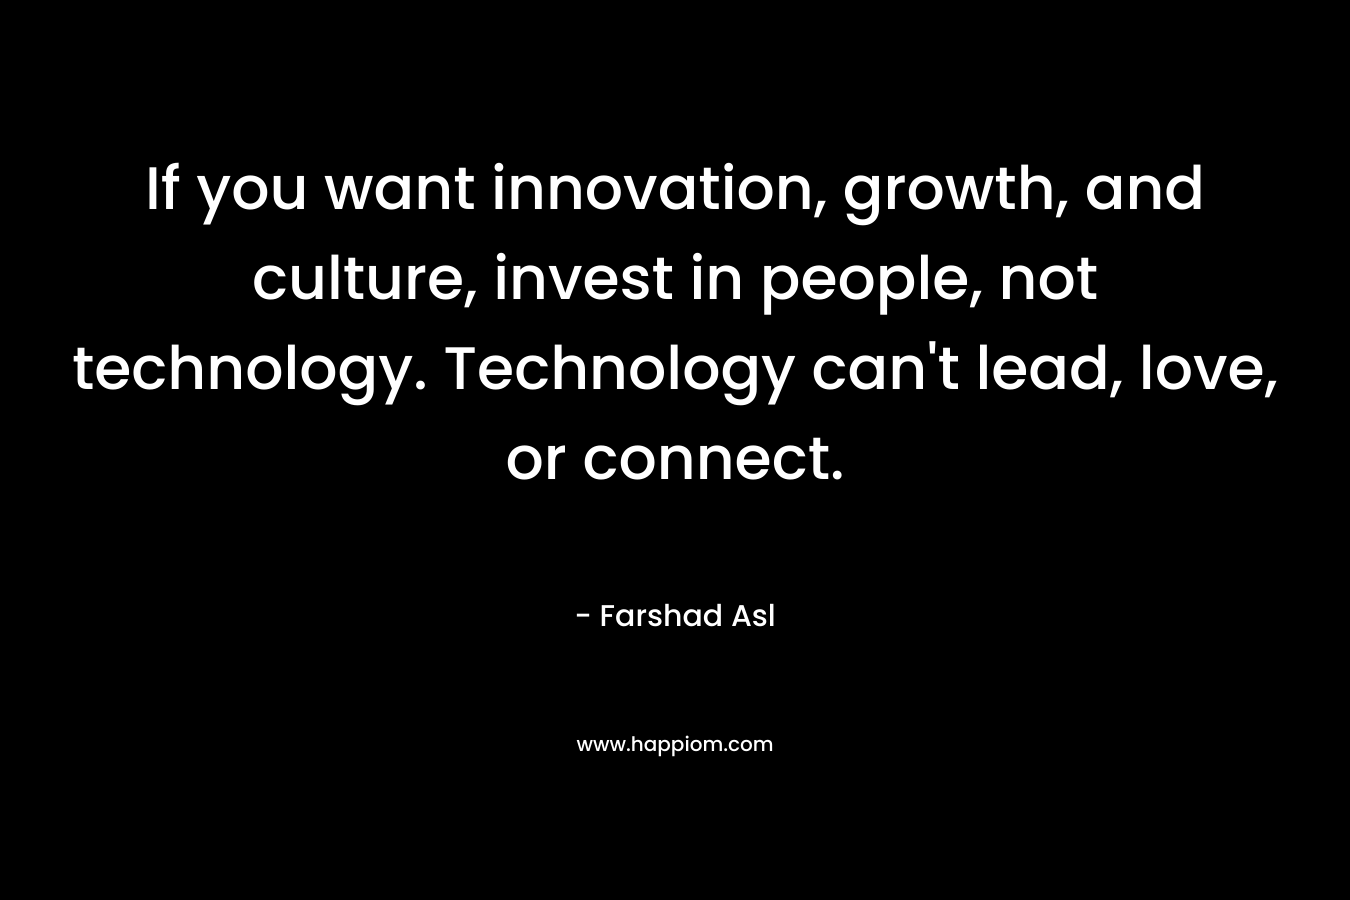 If you want innovation, growth, and culture, invest in people, not technology. Technology can’t lead, love, or connect. – Farshad Asl